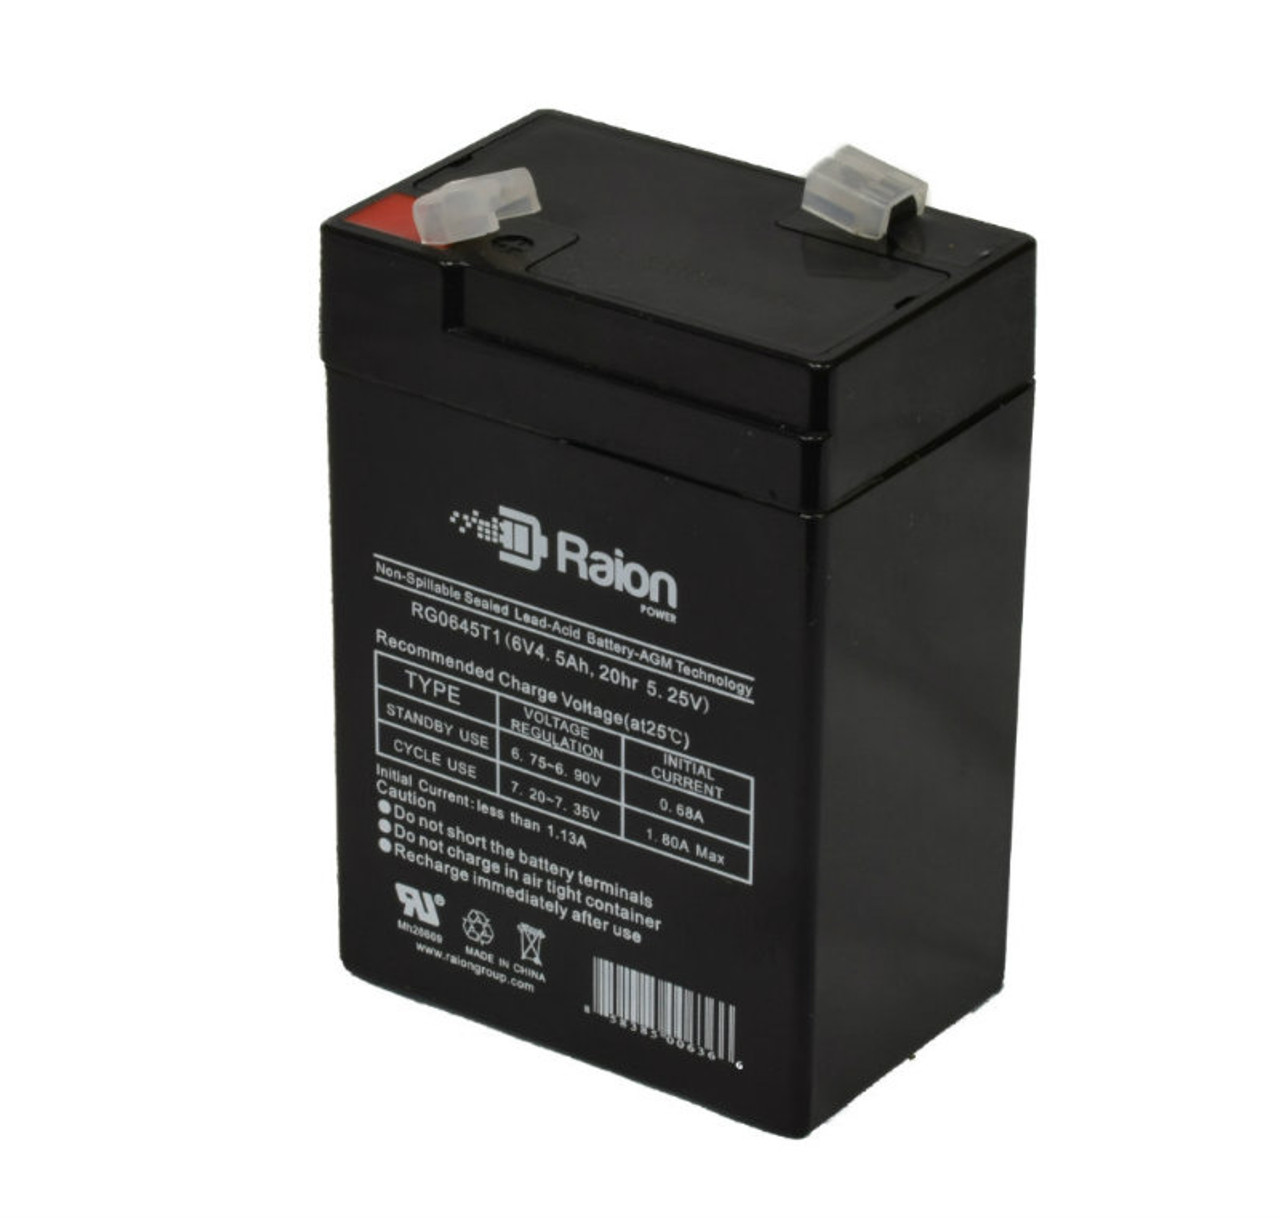 Raion Power RG0645T1 6V 4.5Ah Replacement Battery Cartridge for MUST FC6-4.5CUT